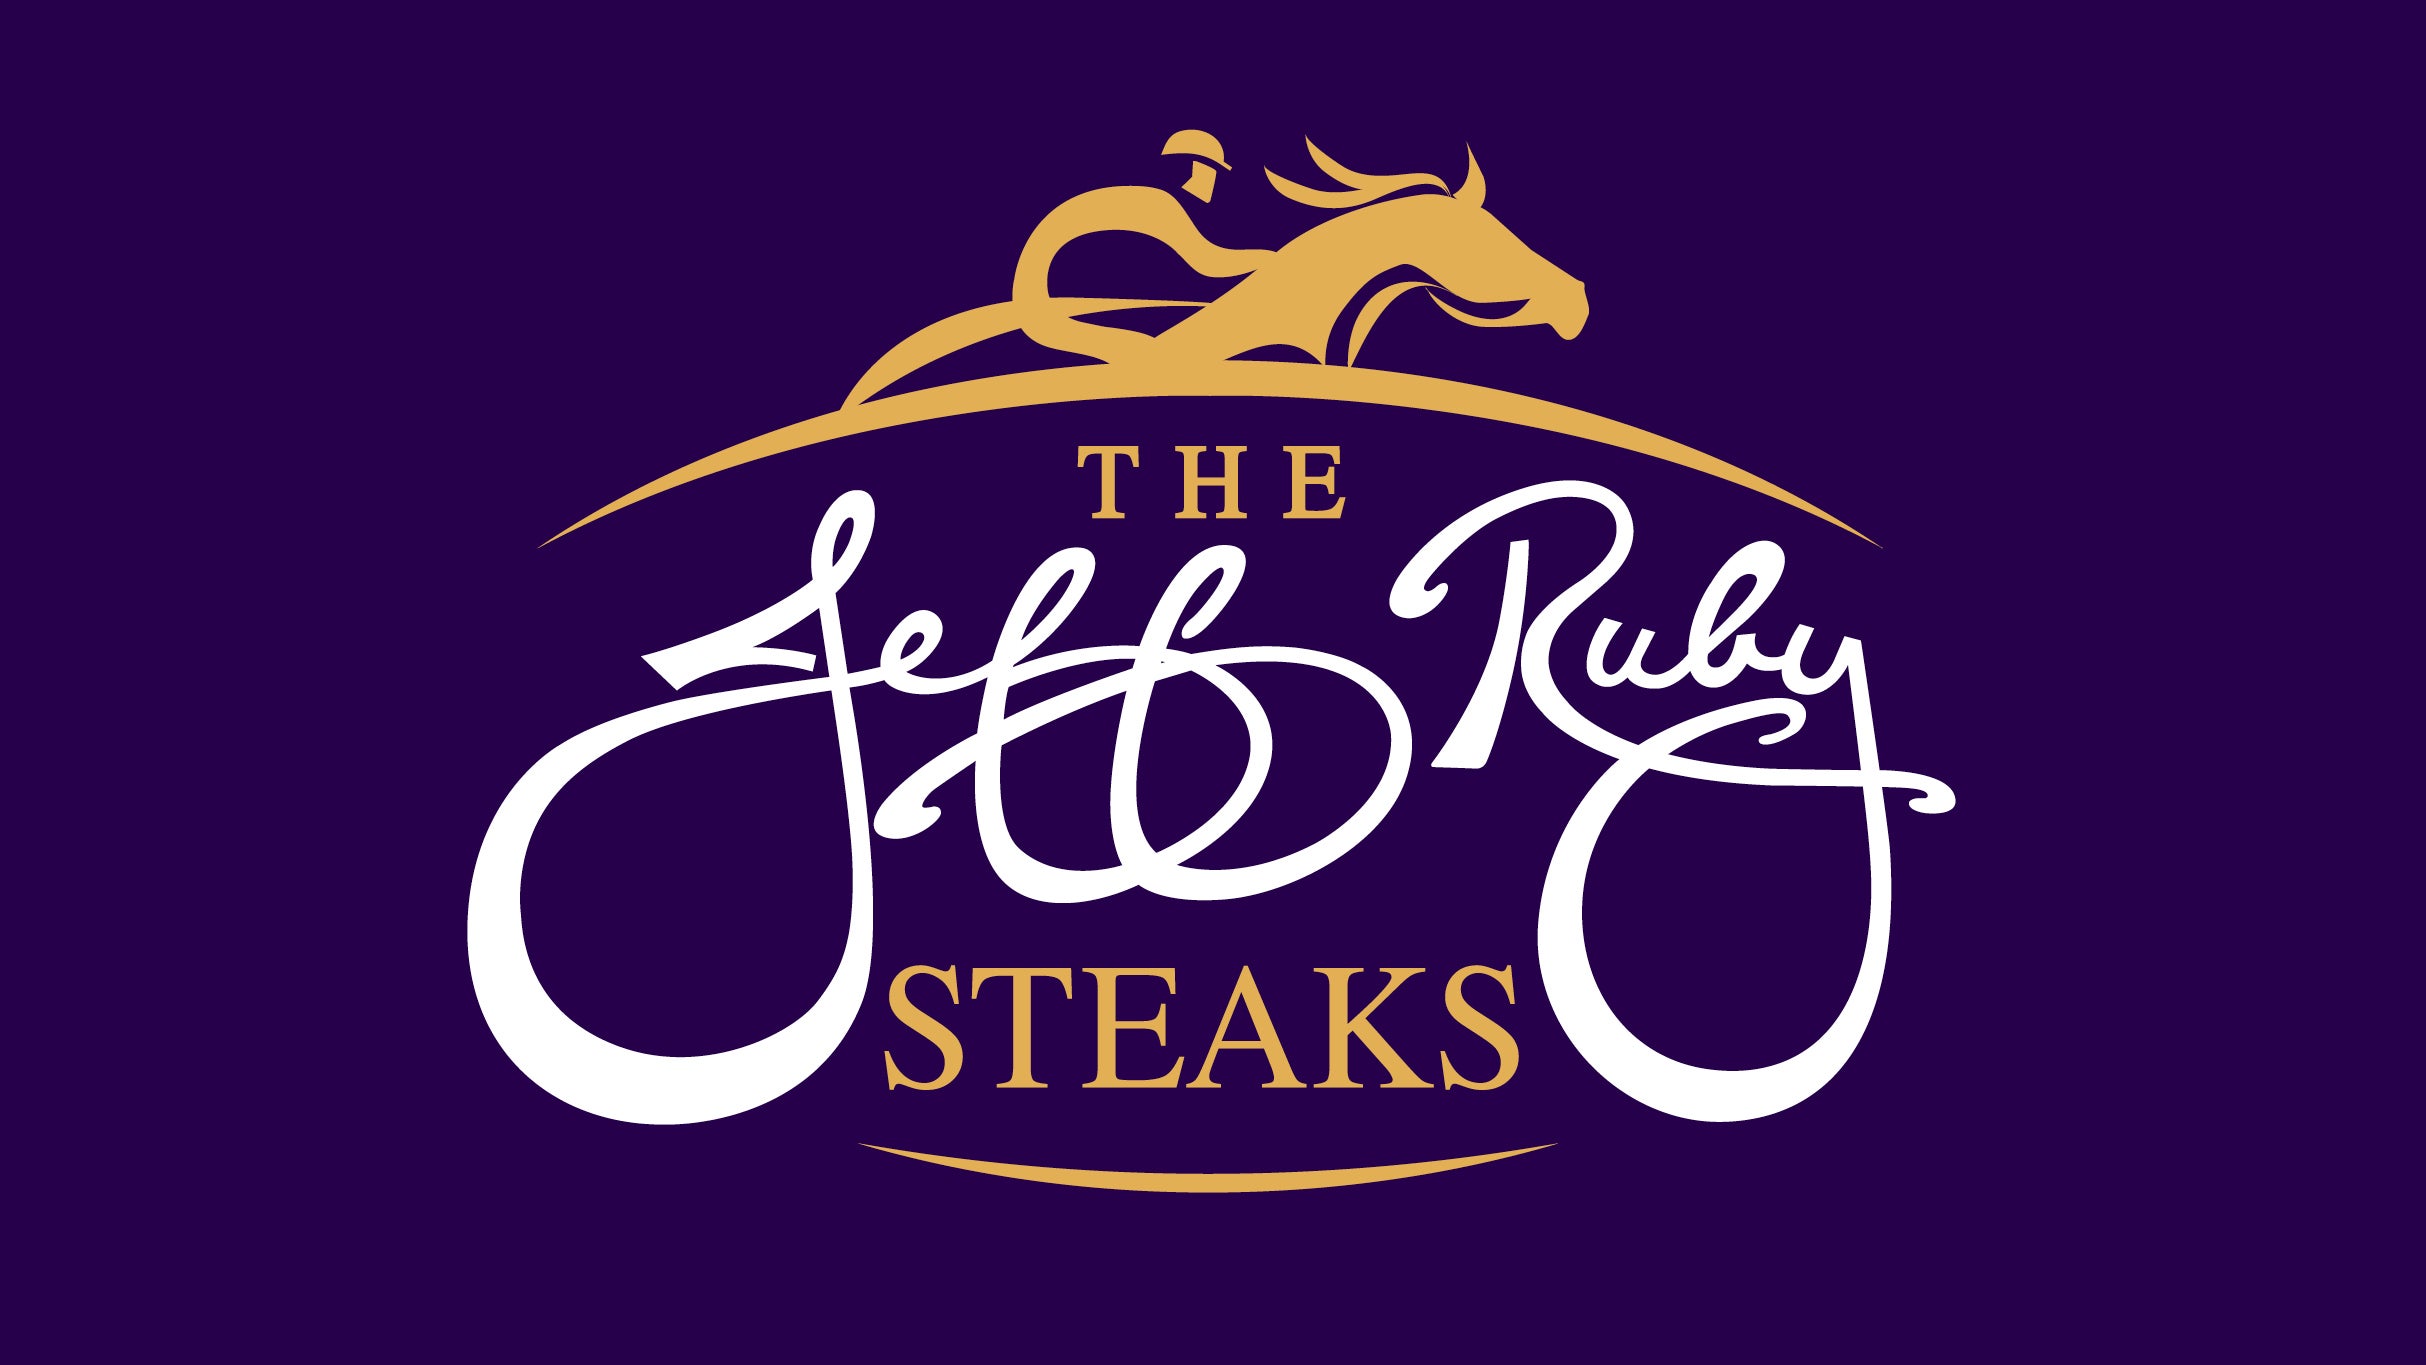 Jeff Ruby Steaks in Florence promo photo for Jeff Ruby Steaks VIP DIscount presale offer code